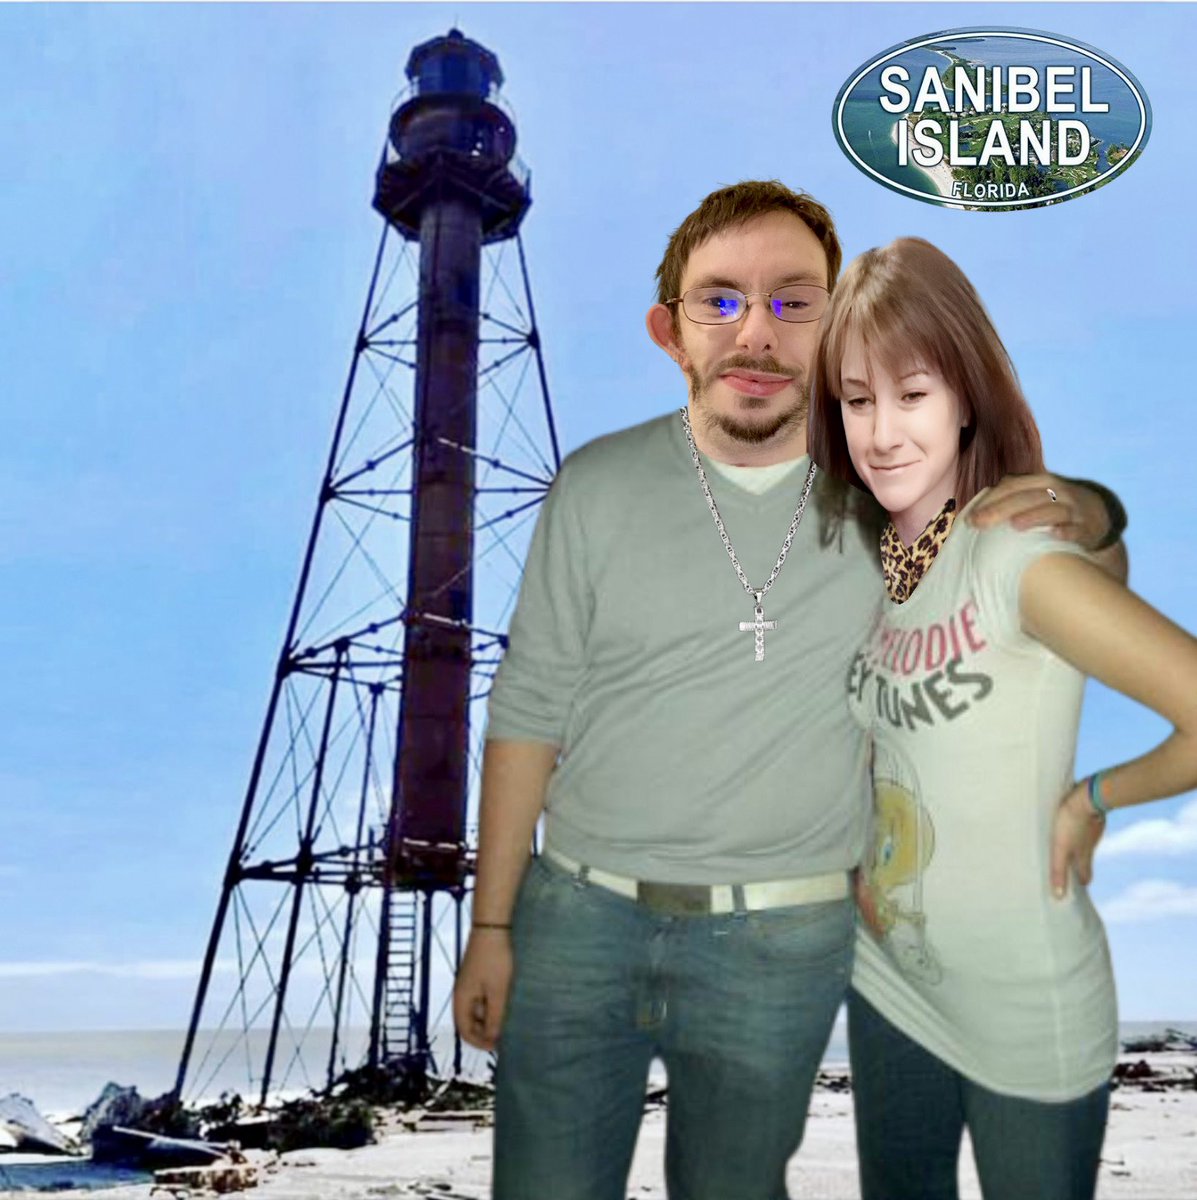 Now the Sanibel lighthouse is open again, I probably should check it out at some point when I get a chance to come visit you. The tower itself is off limits to visitors but you can still take pictures from the outside. Anyway, it should be a lot of fun.